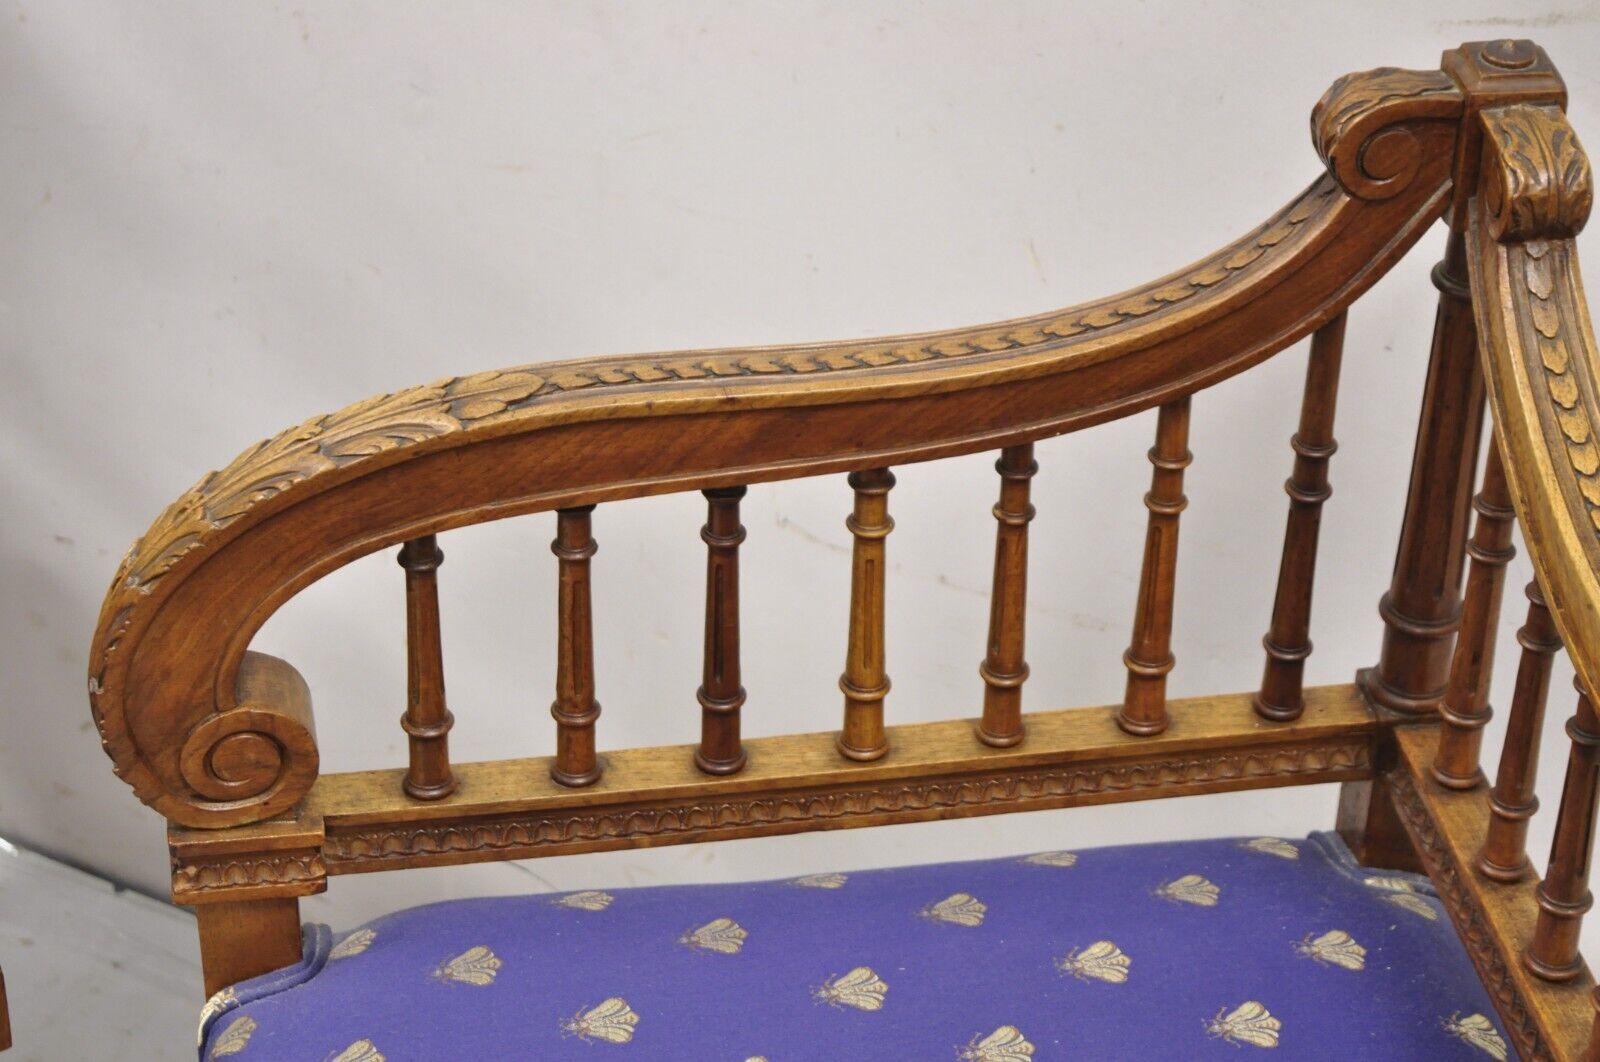 Antique French Louis XVI Style Carved Walnut Lyre Harp Corner Chairs - a Pair For Sale 2